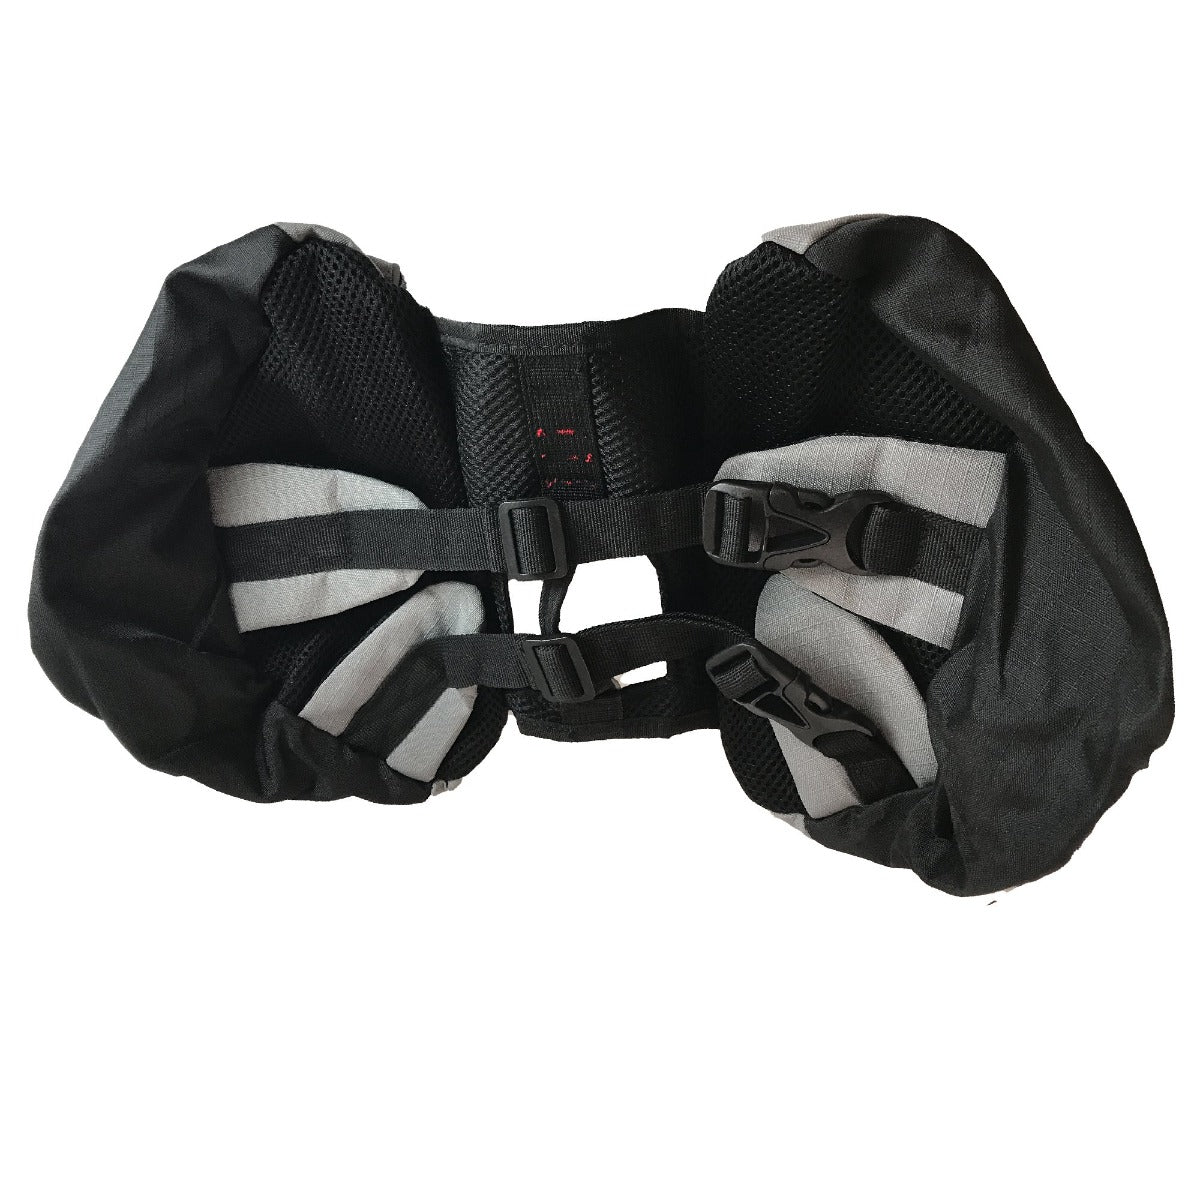 View of the underside belly straps of the dog backpack